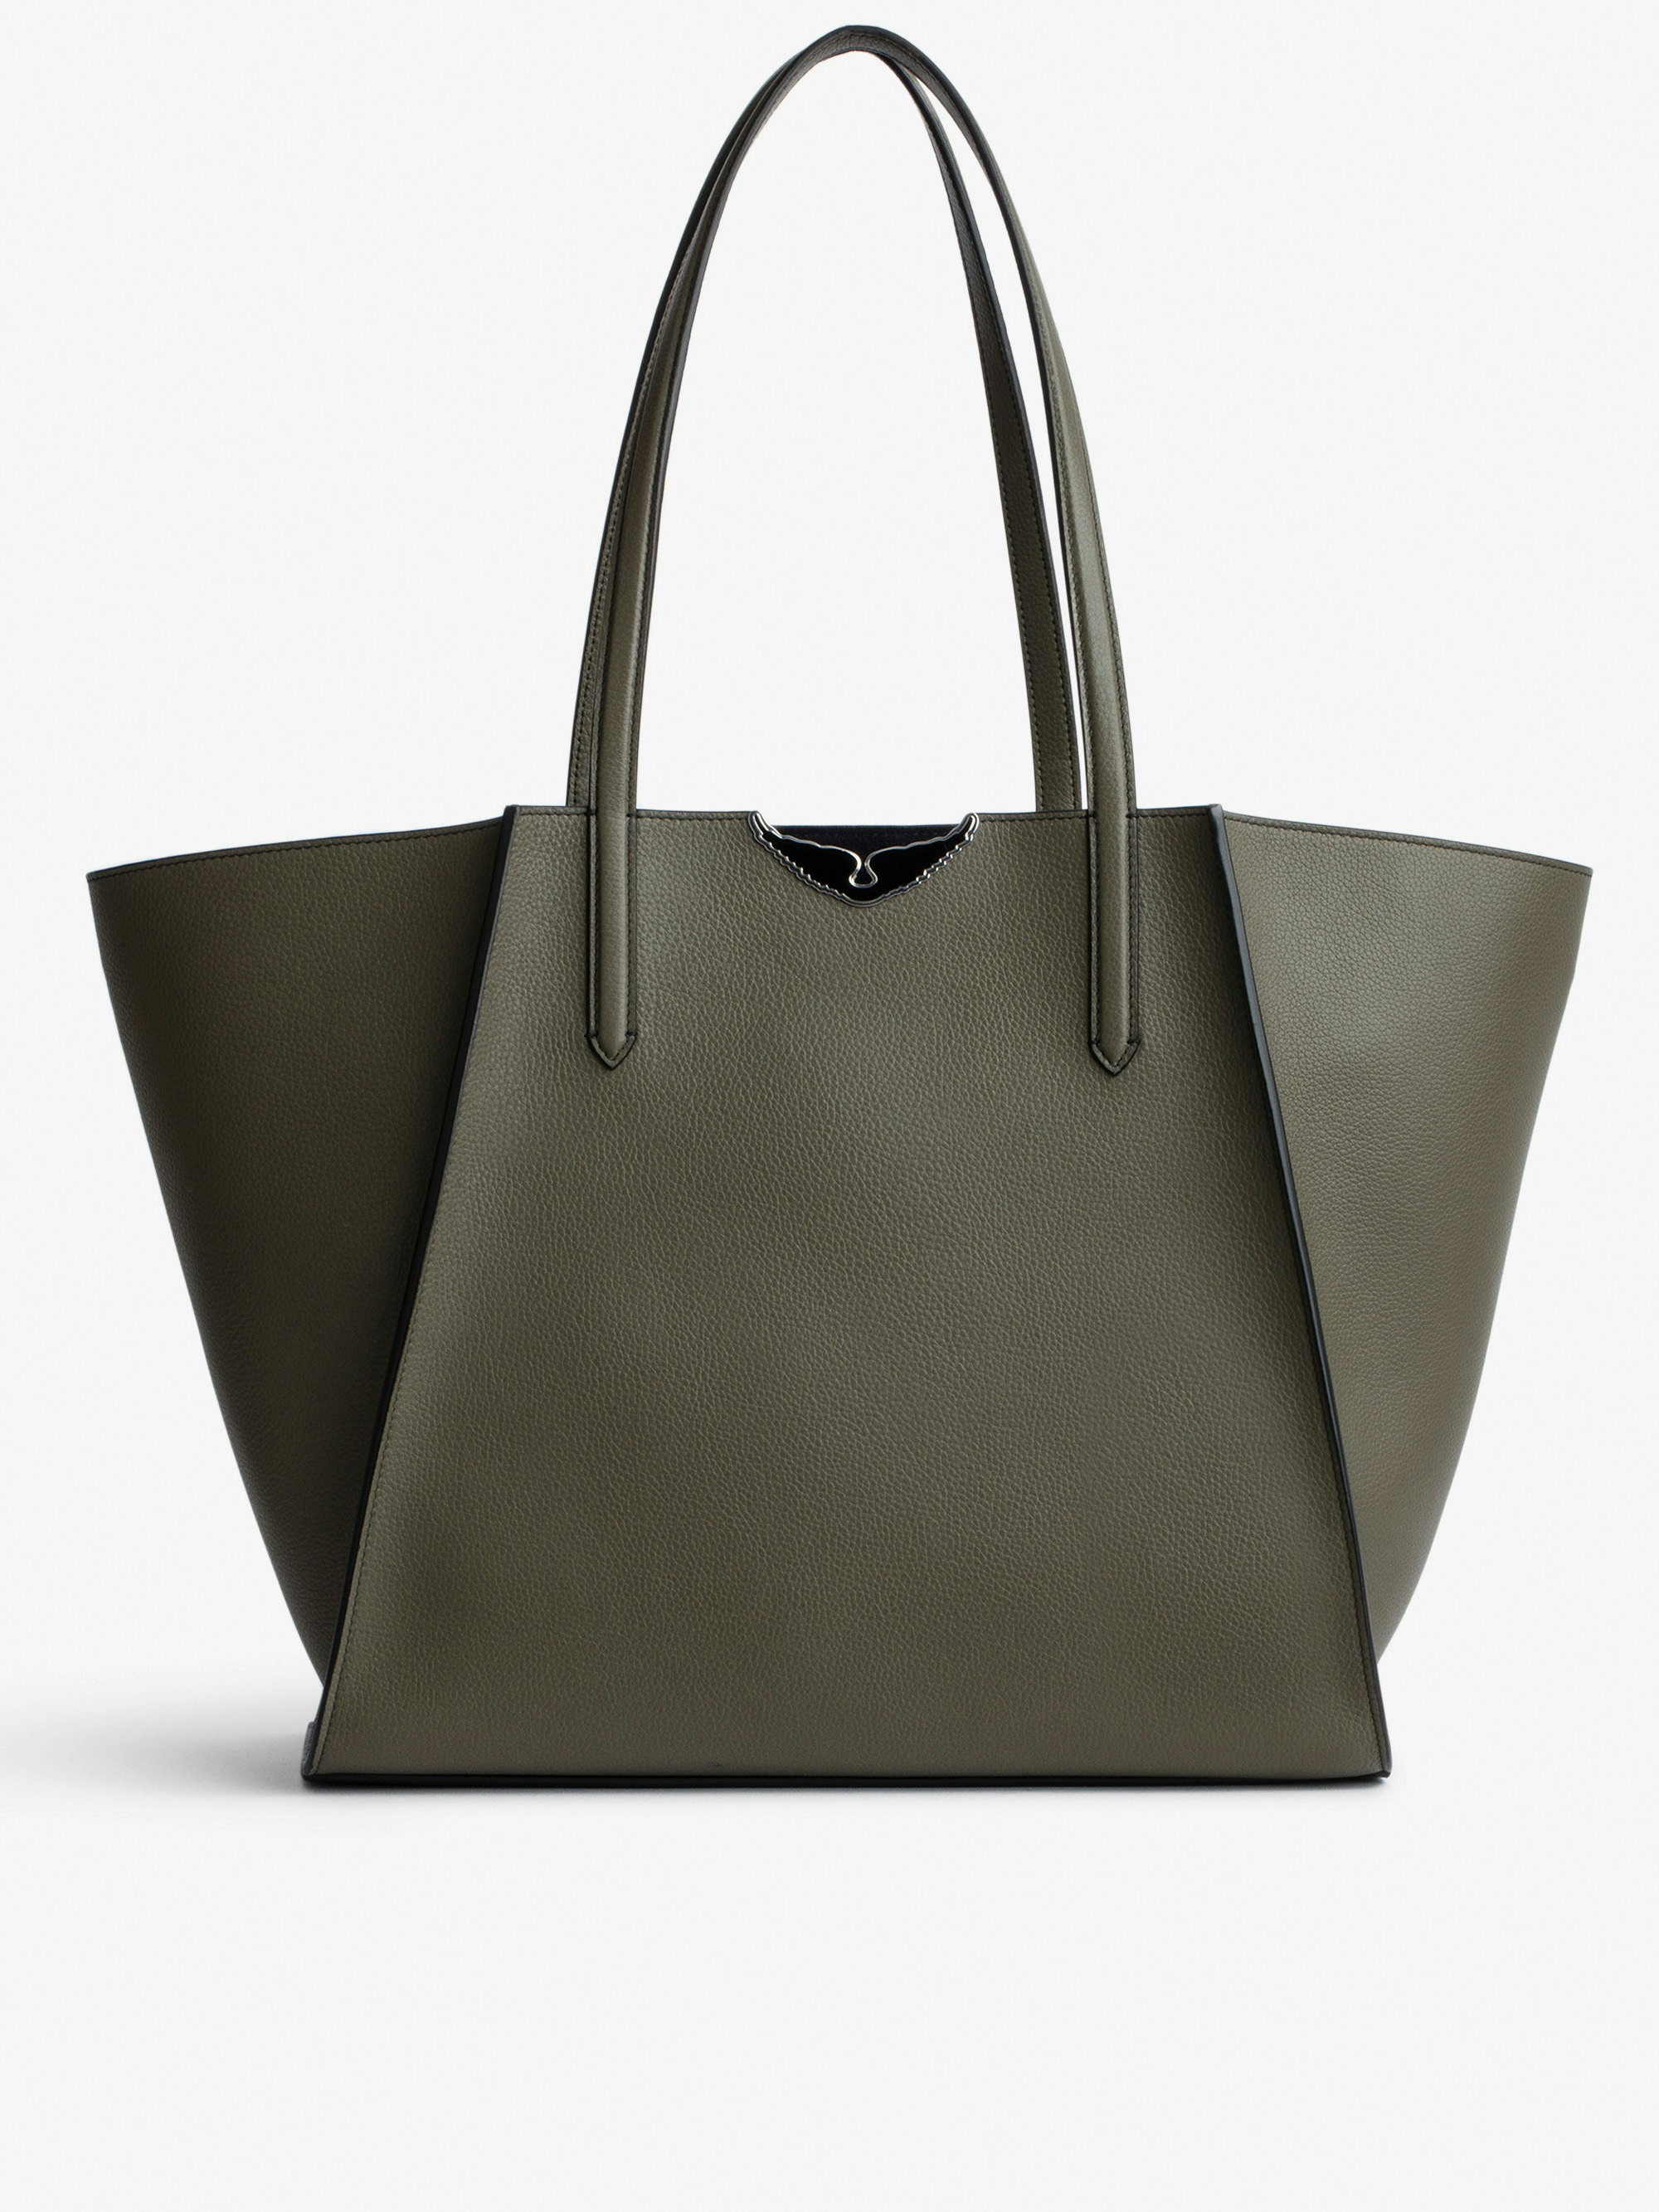 Le Borderline Bag - Women's tote bag in khaki grained leather and navy-blue suede with black lacquered wings